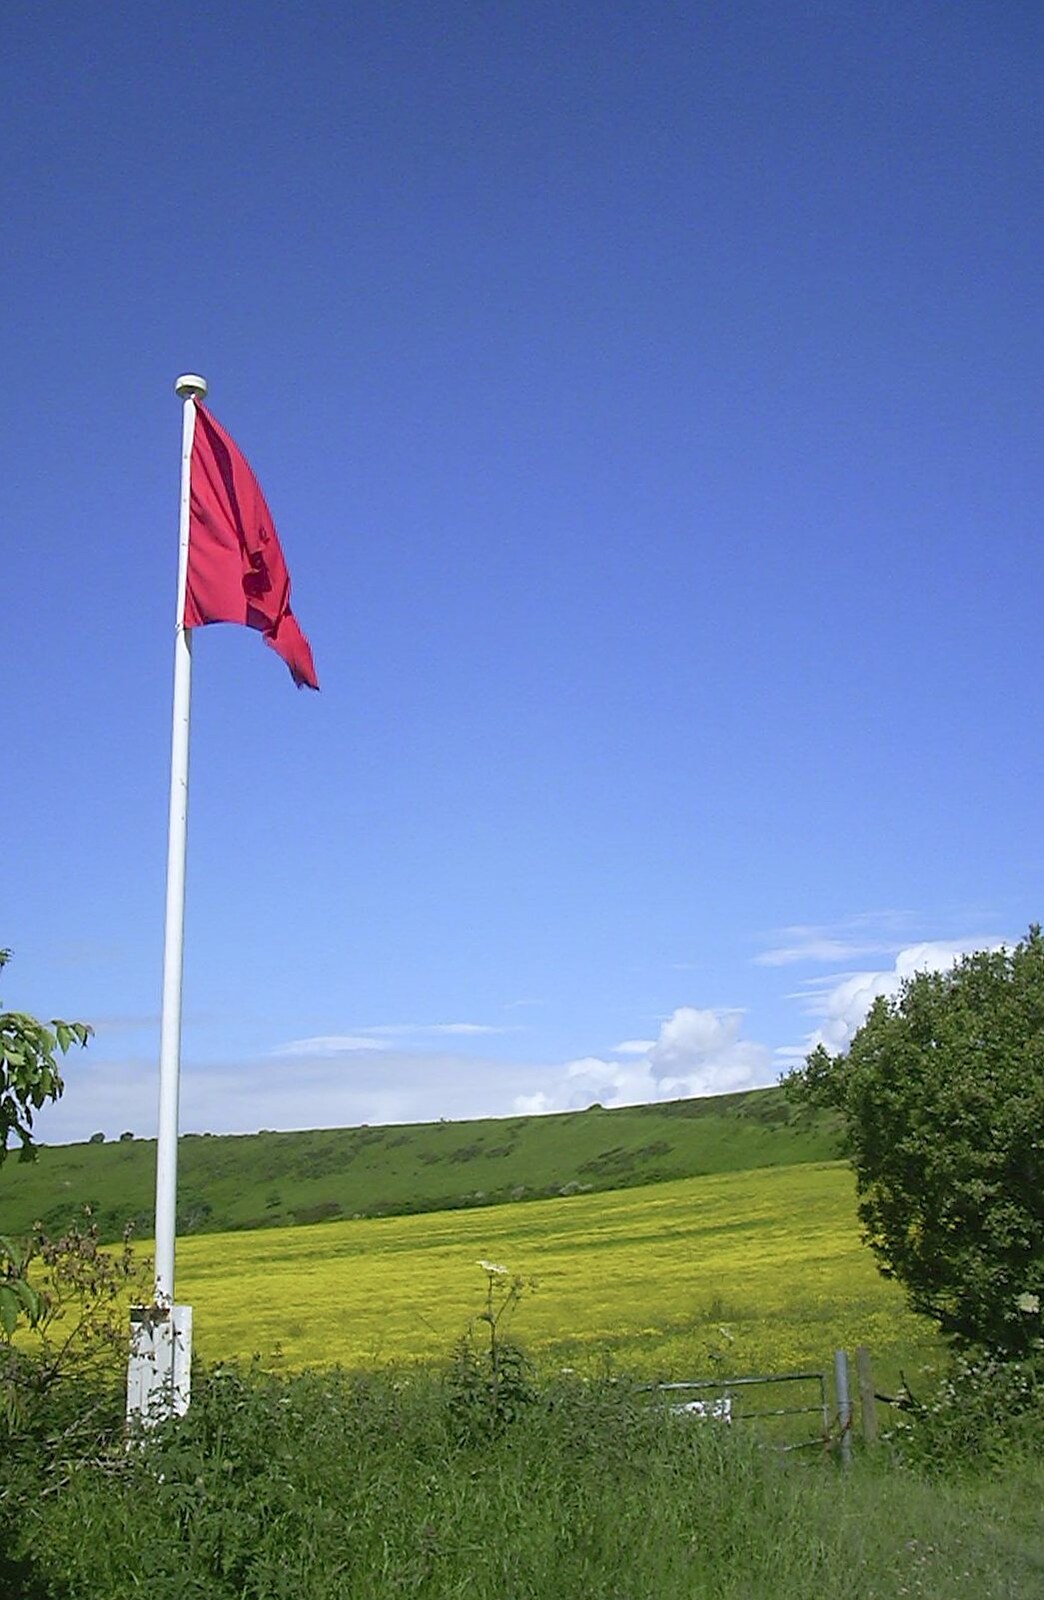 Corfe Castle Camping, Corfe, Dorset - 30th May 2004: The red flag warns that army ranges are all around